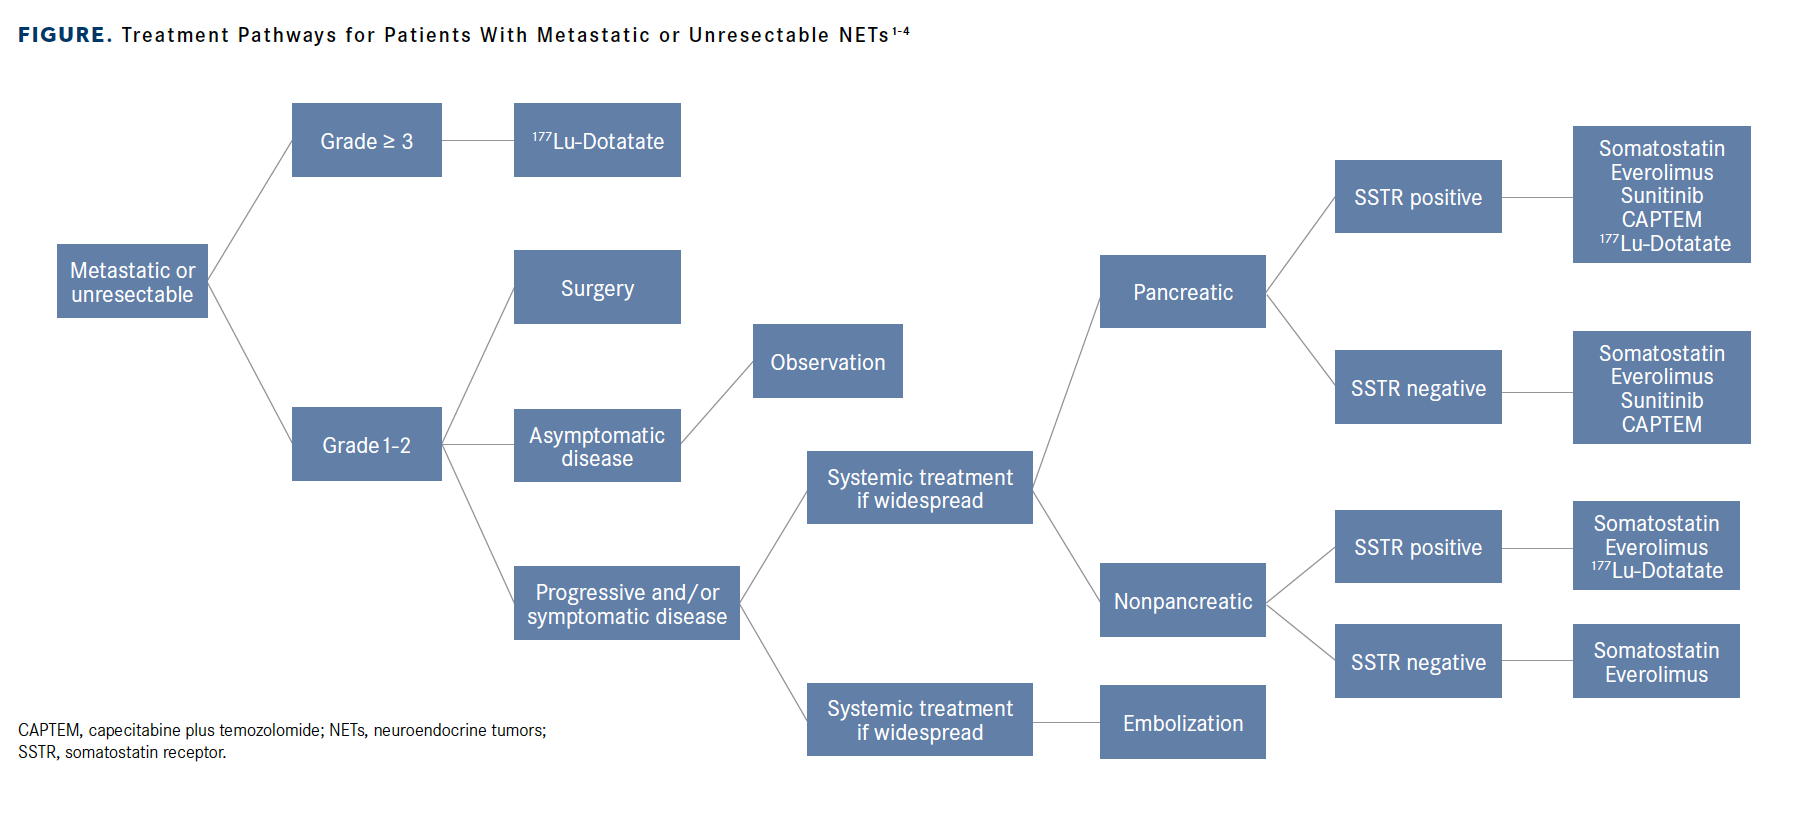 Figure. Treatment Pathways for Patients With Metastatic or Unresectable NETs1-4